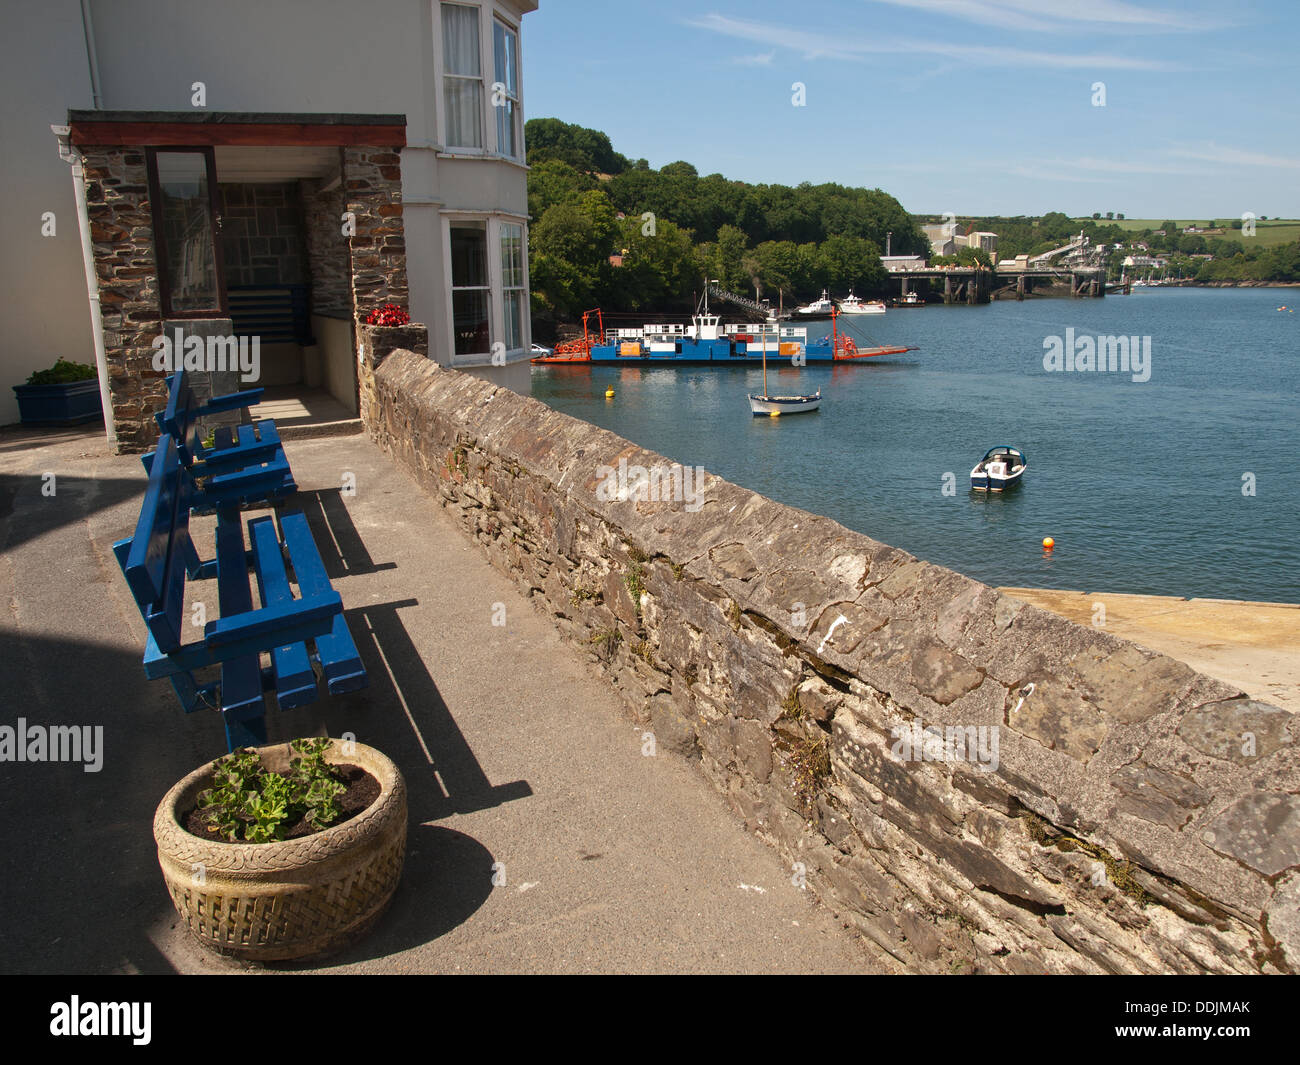 Fowey Cornwall England UK Banque D'Images